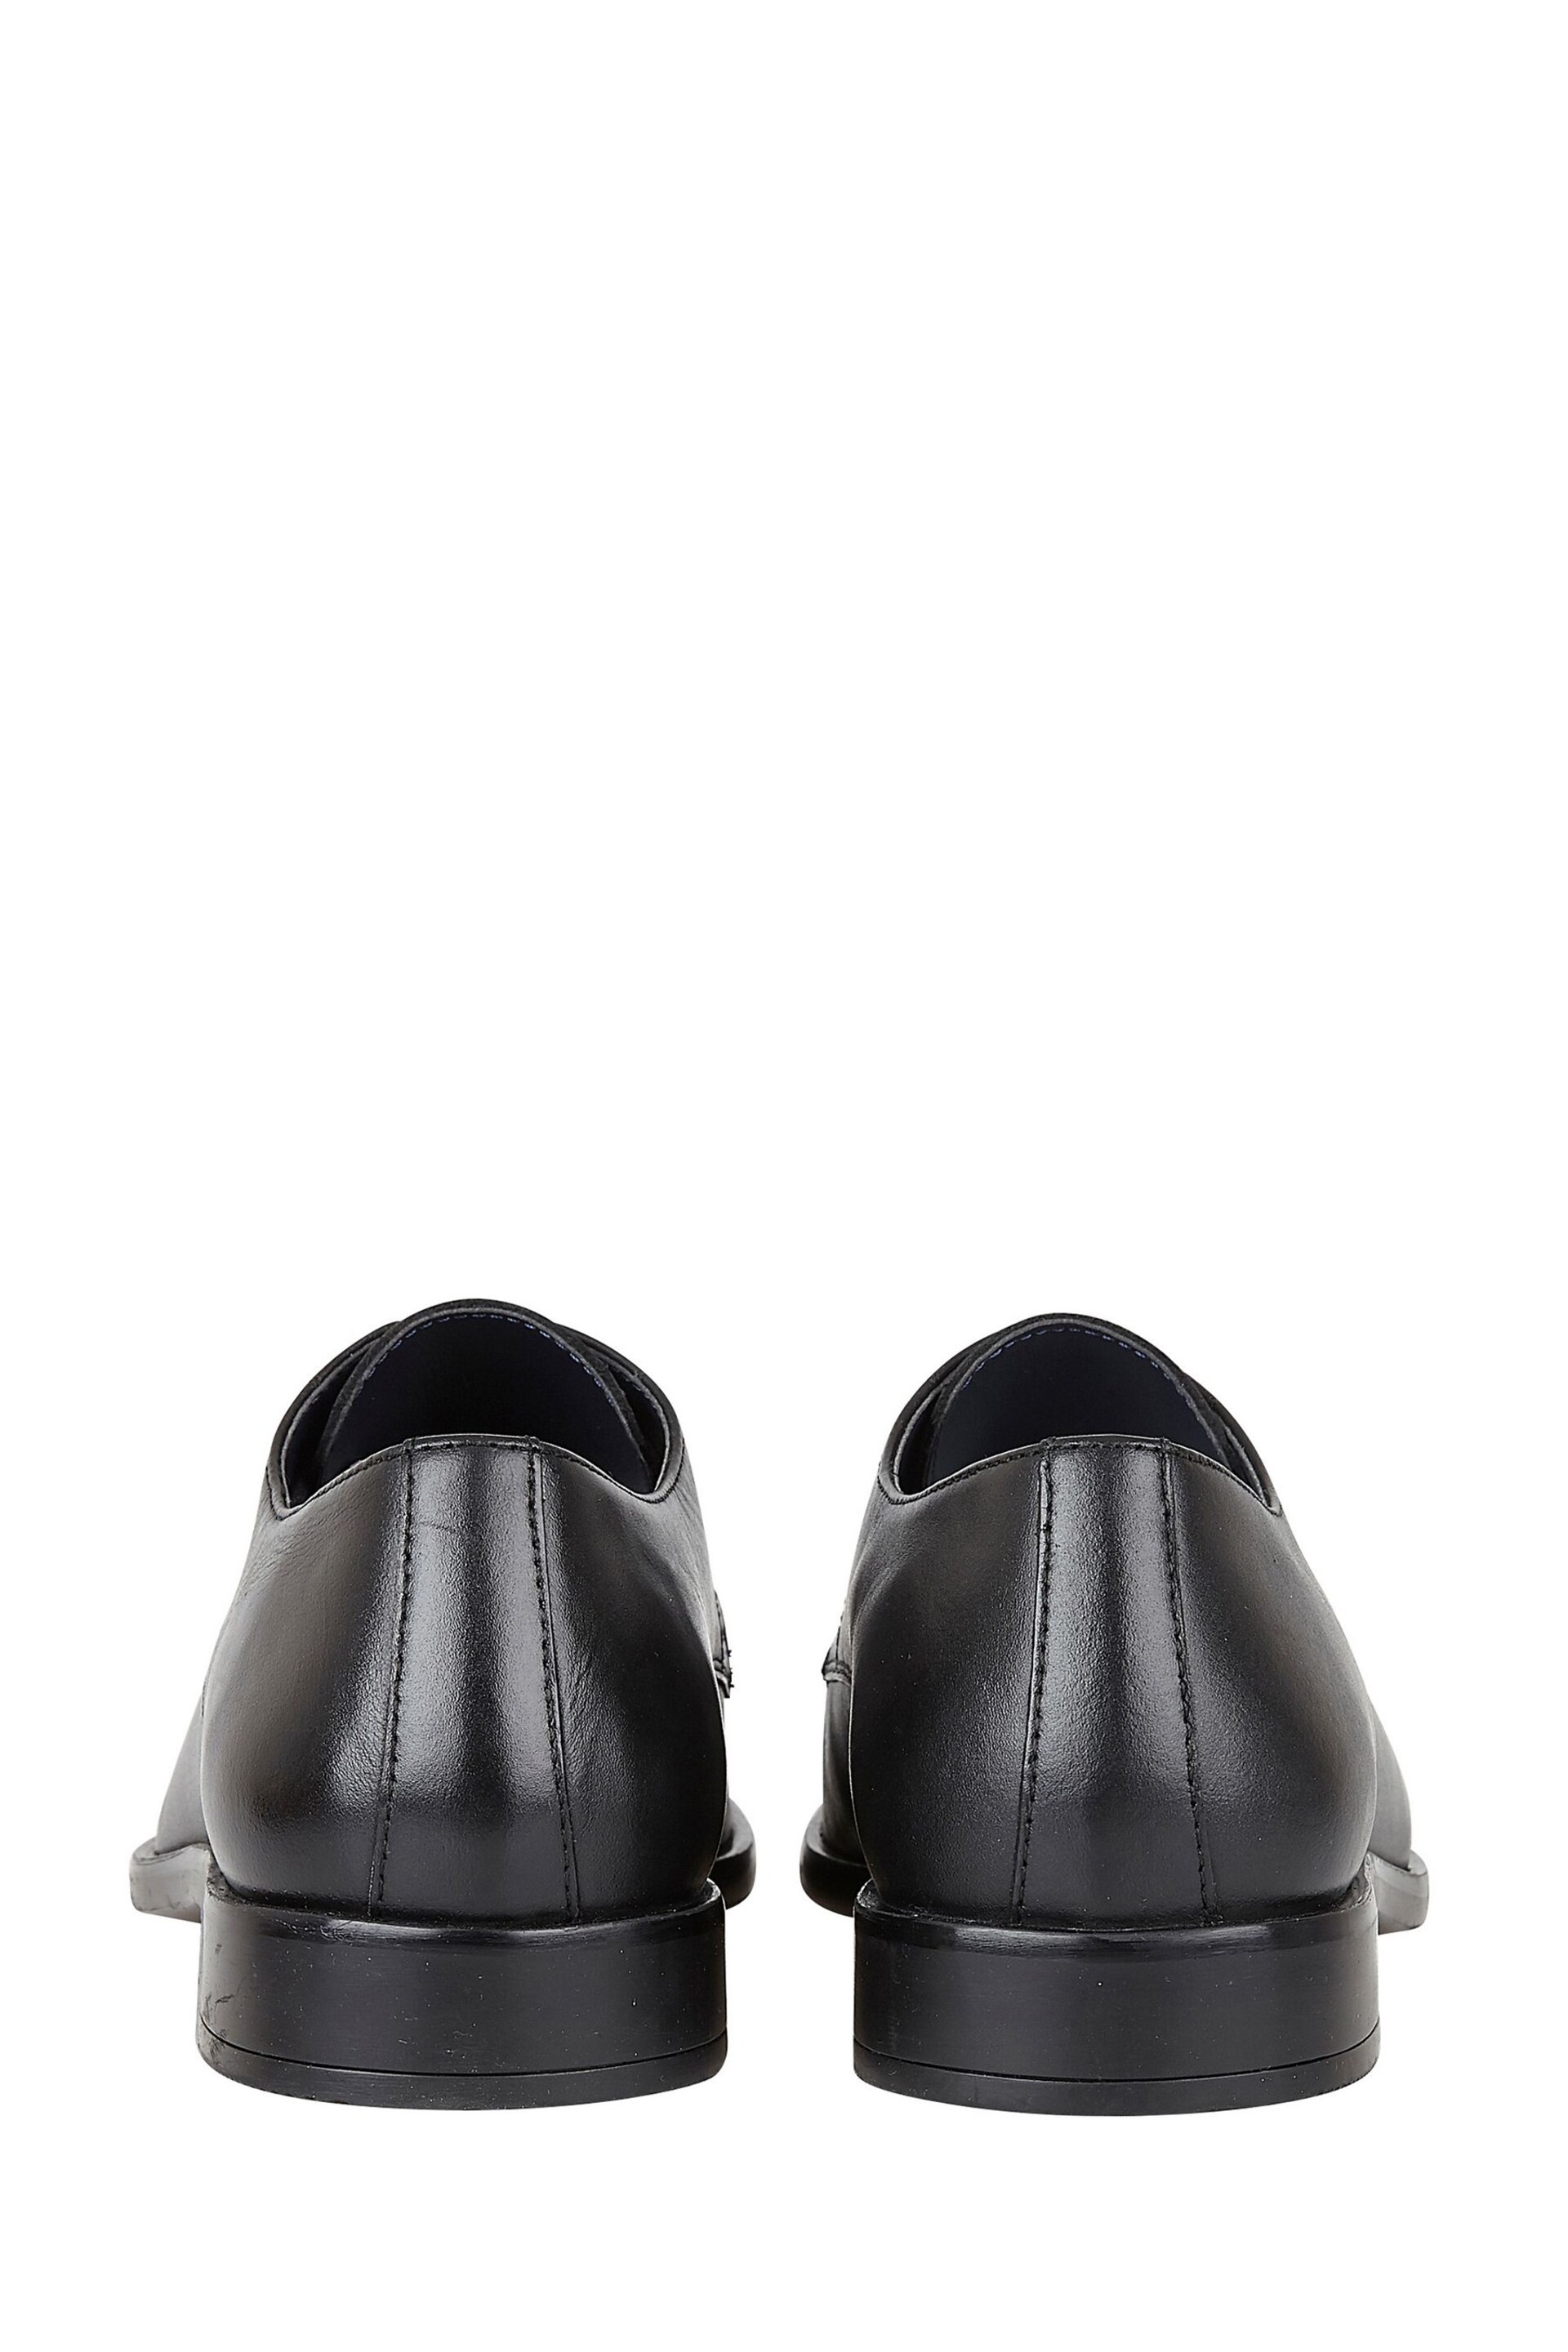 Lotus Charcole Black Leather Derby Shoes - Image 3 of 4